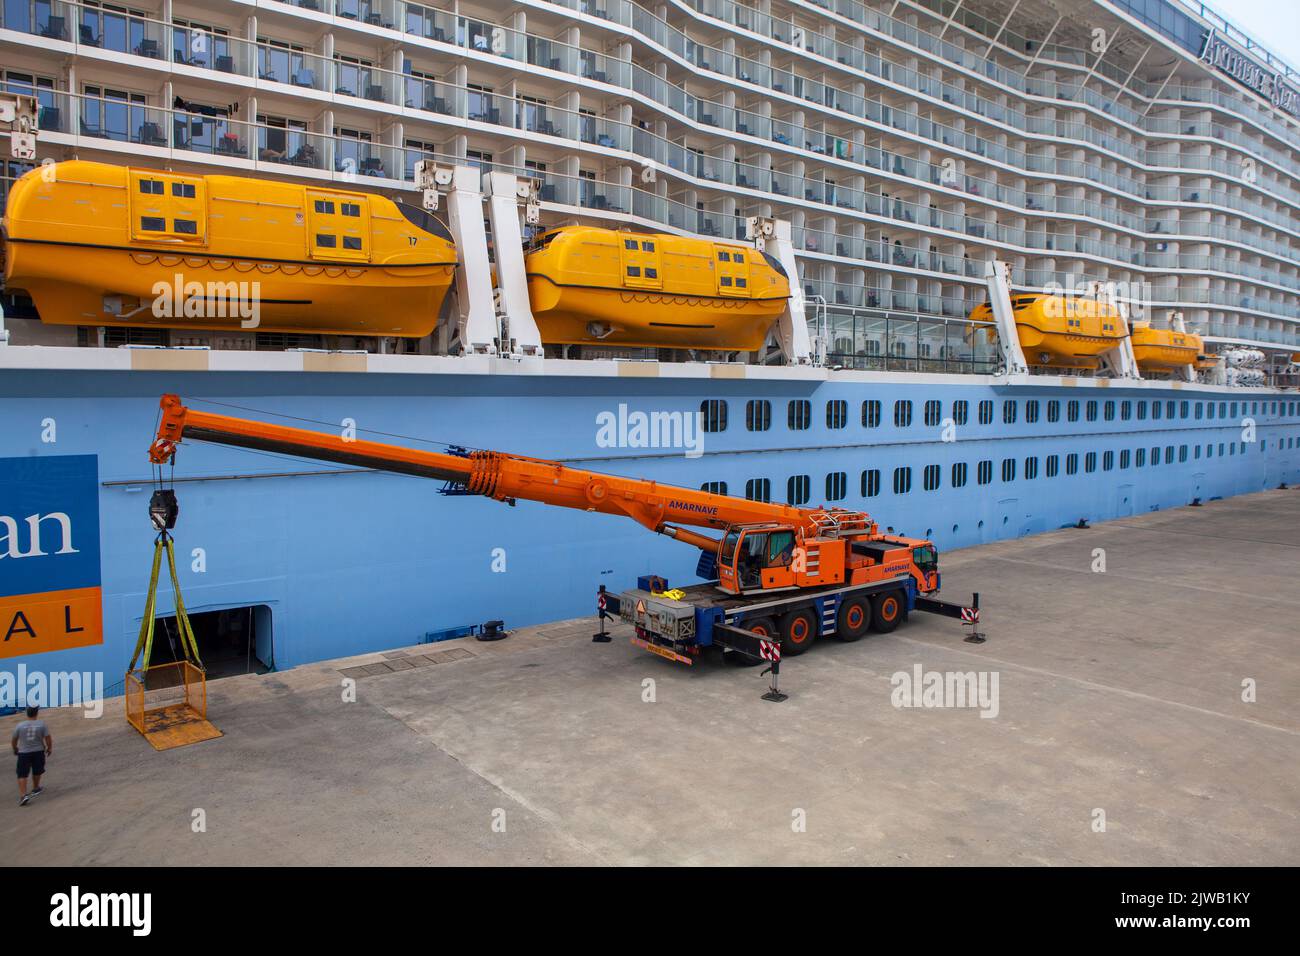 Stocking up on food supplies on the Royal Caribbean Anthem of the Seas during a cruise Stock Photo